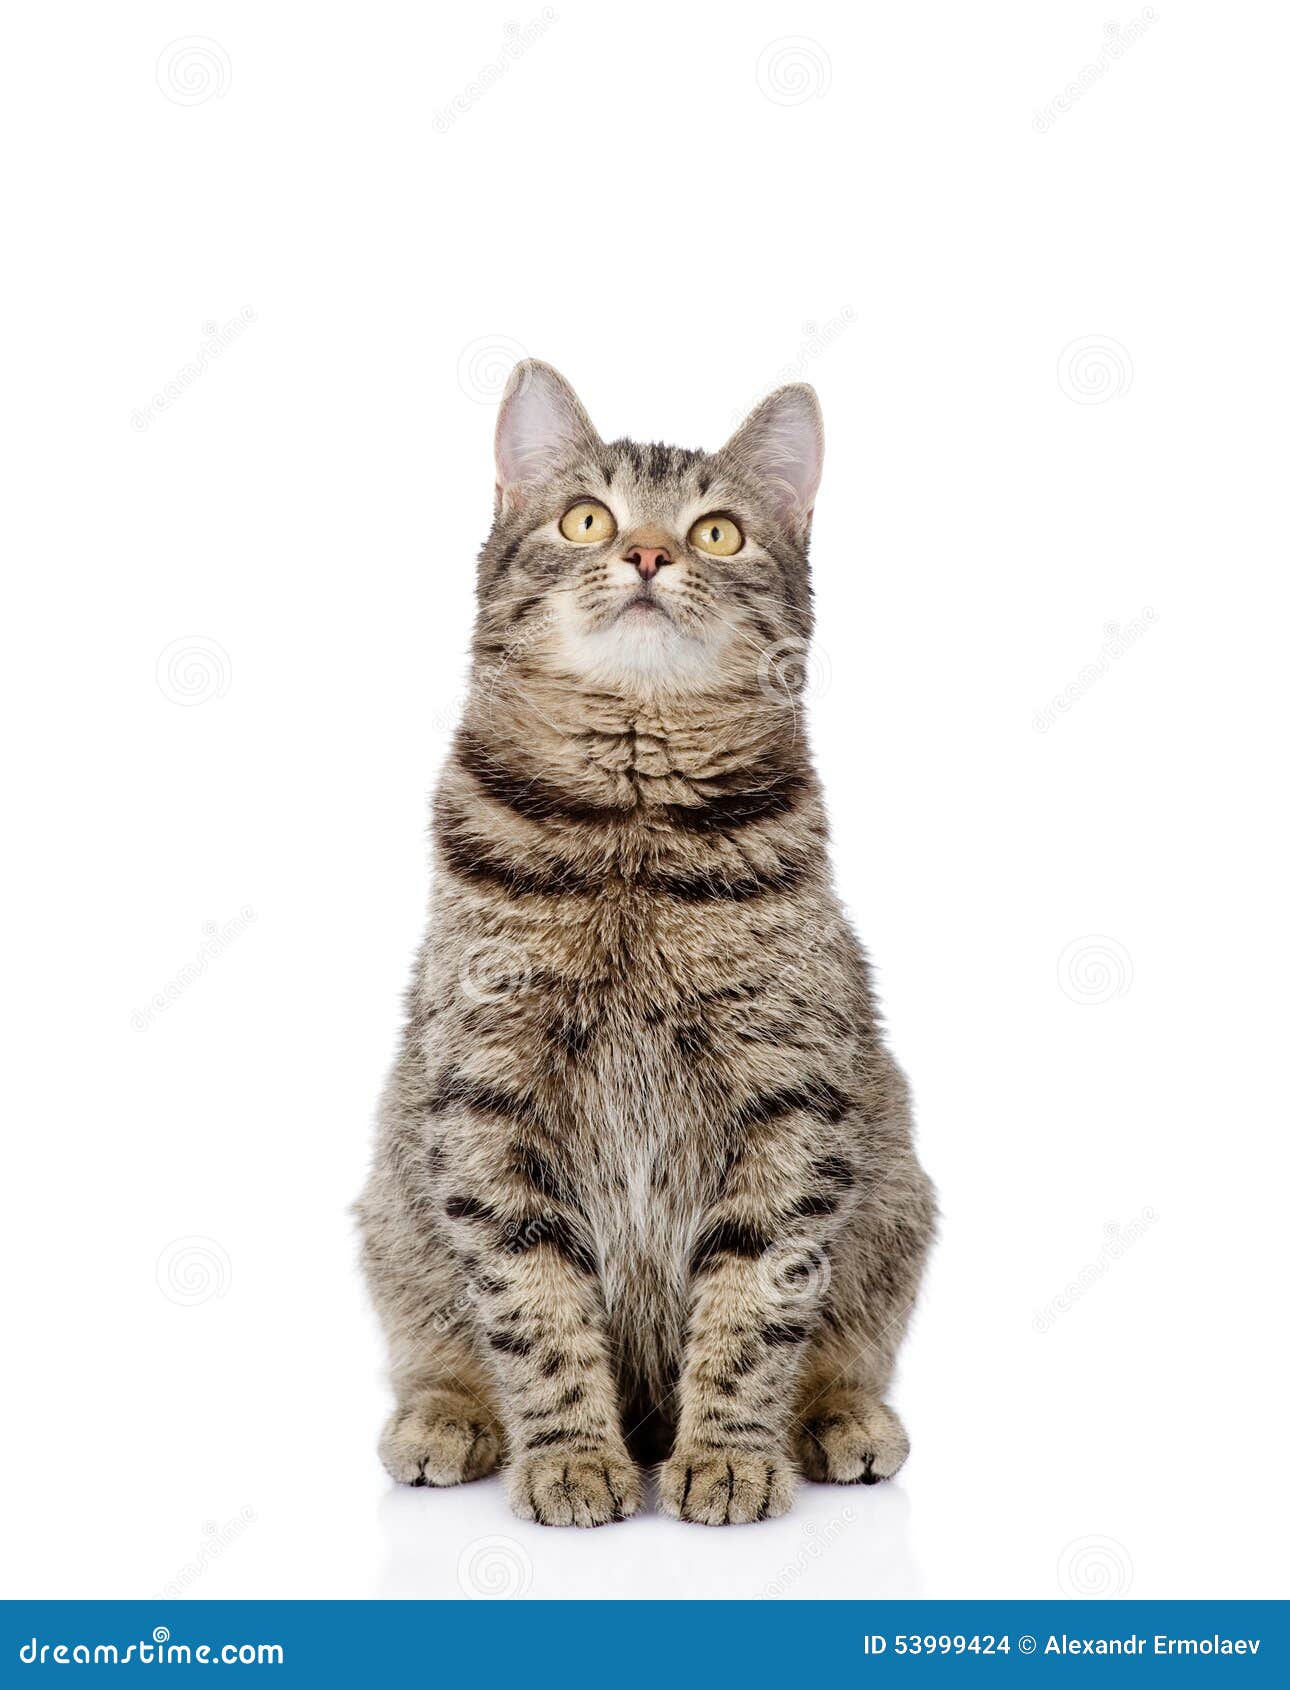 Cat Sitting In Front And Looking Up. Isolated On White Background Stock